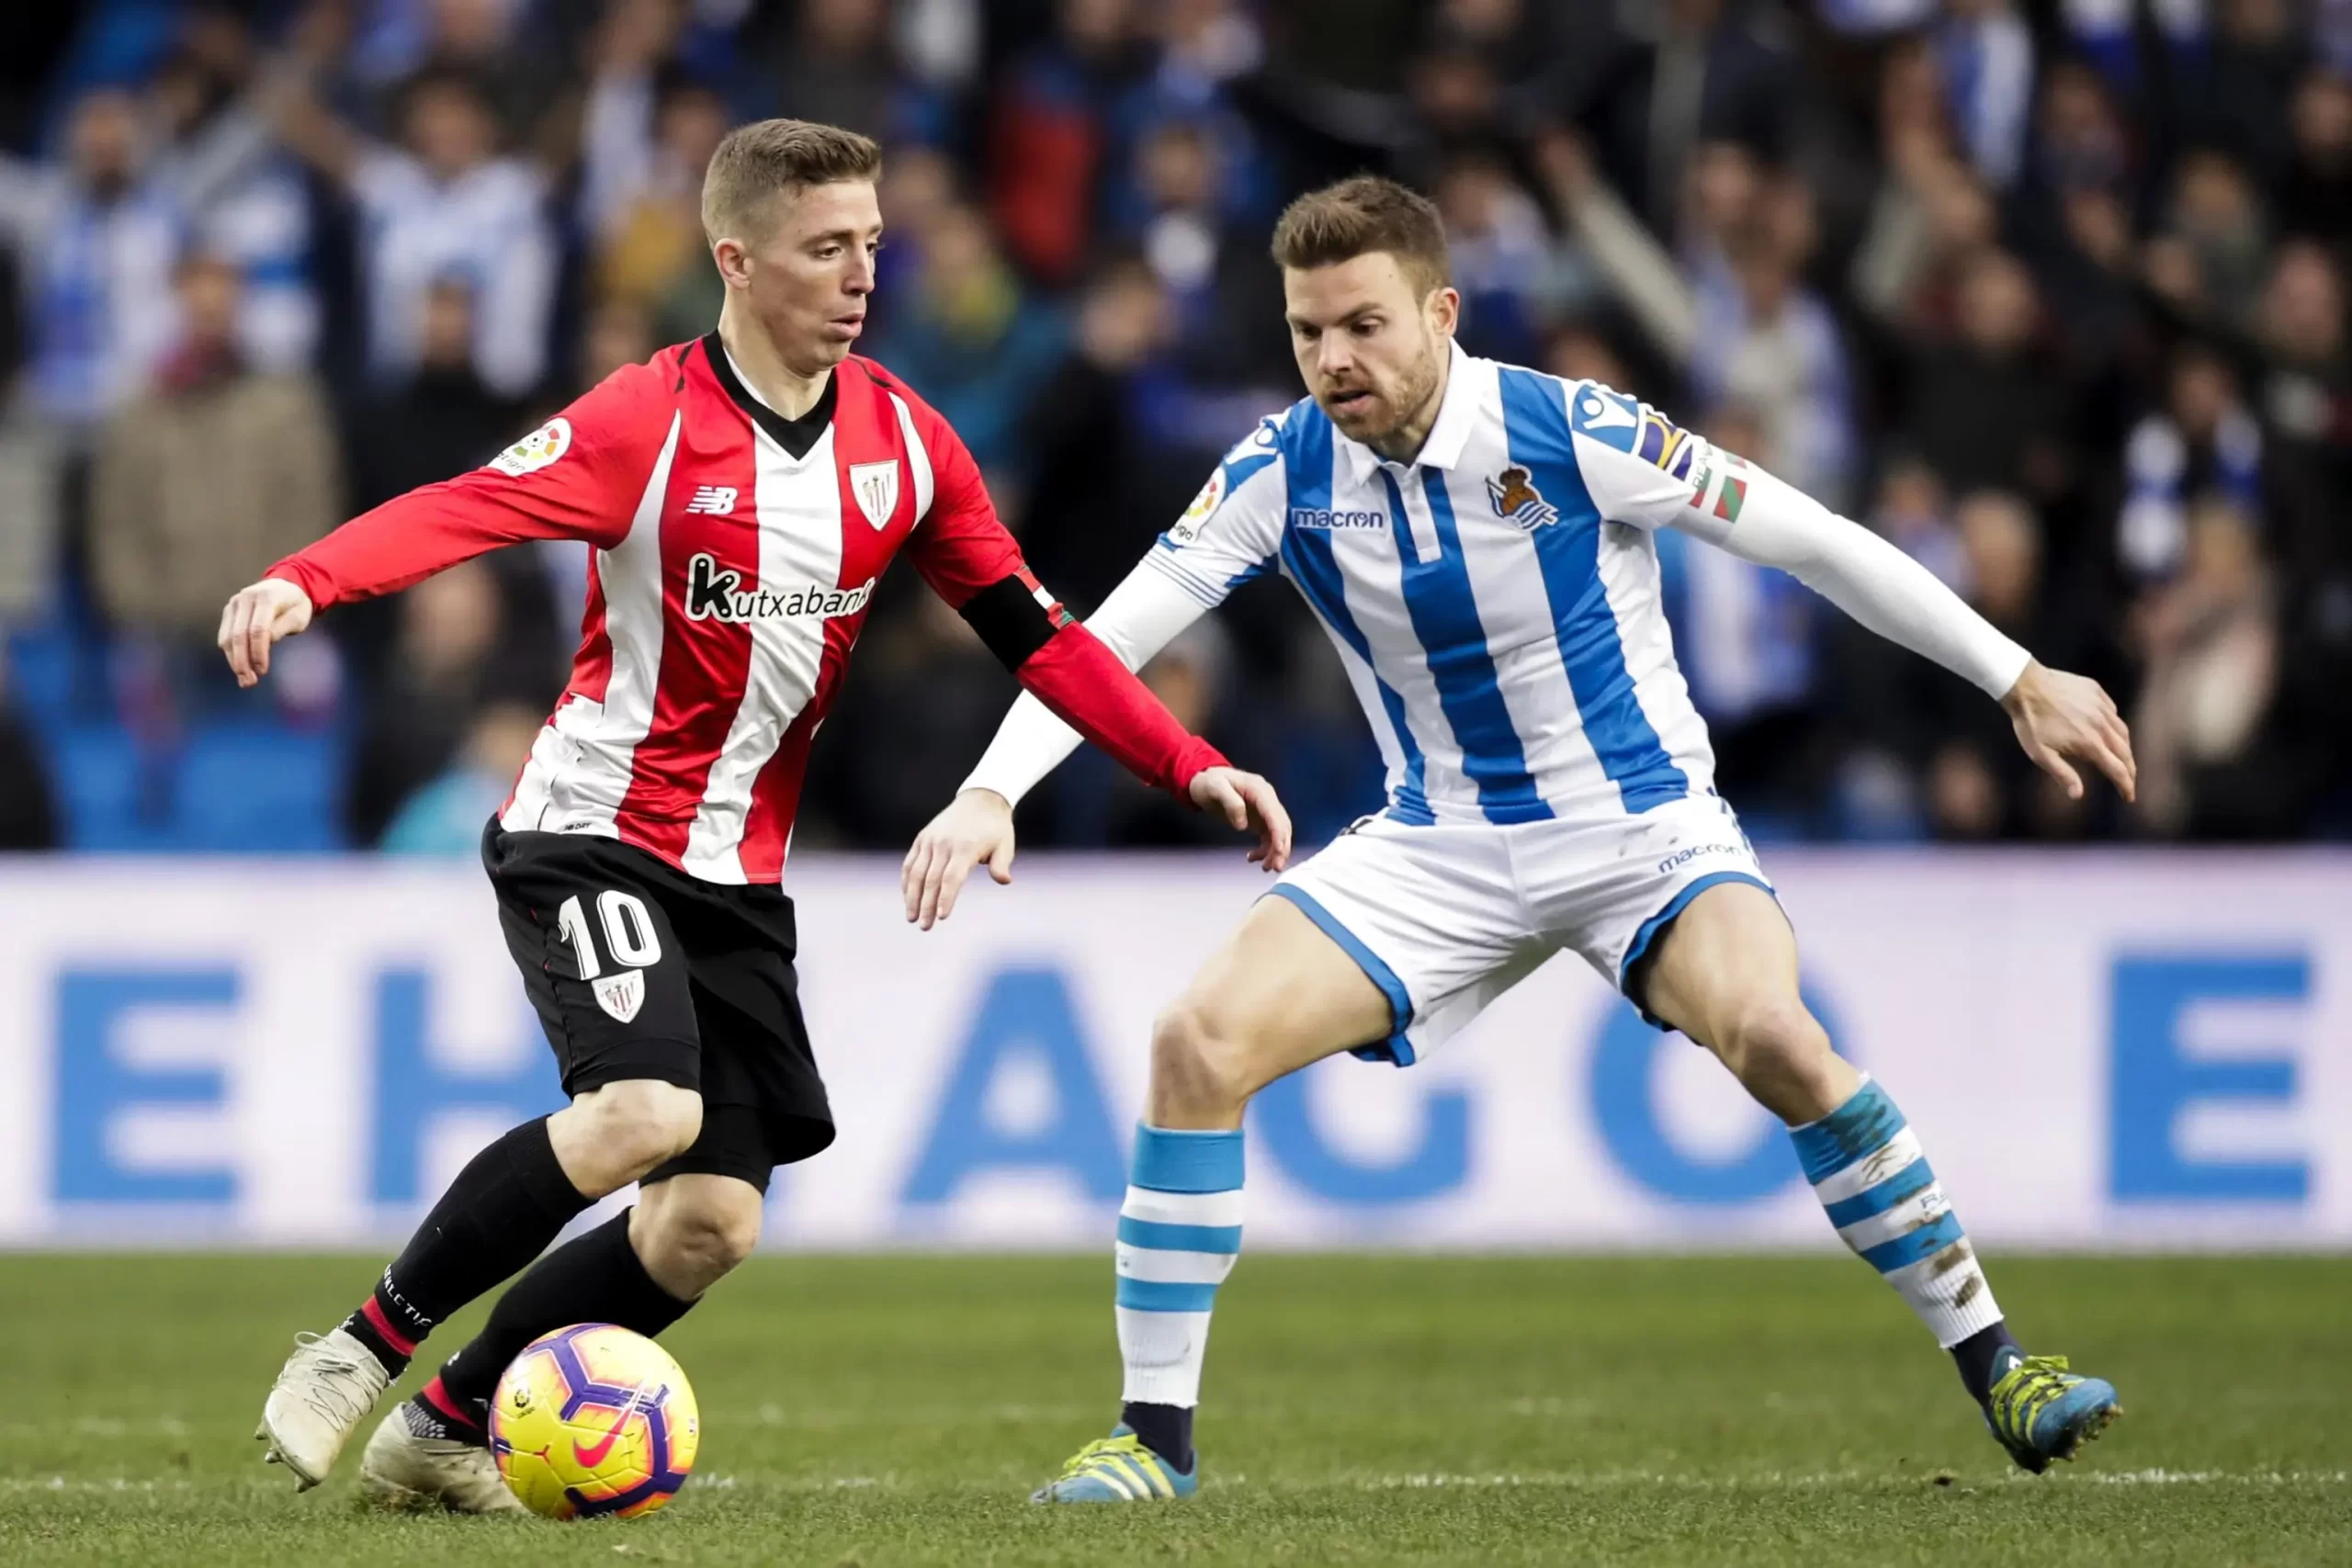 Two footballers, one from Athletic Bilbao in red and white and another from Real Sociedad in blue and white, vie for control of the ball on the pitch in a Bilbao vs Real Sociedad game.